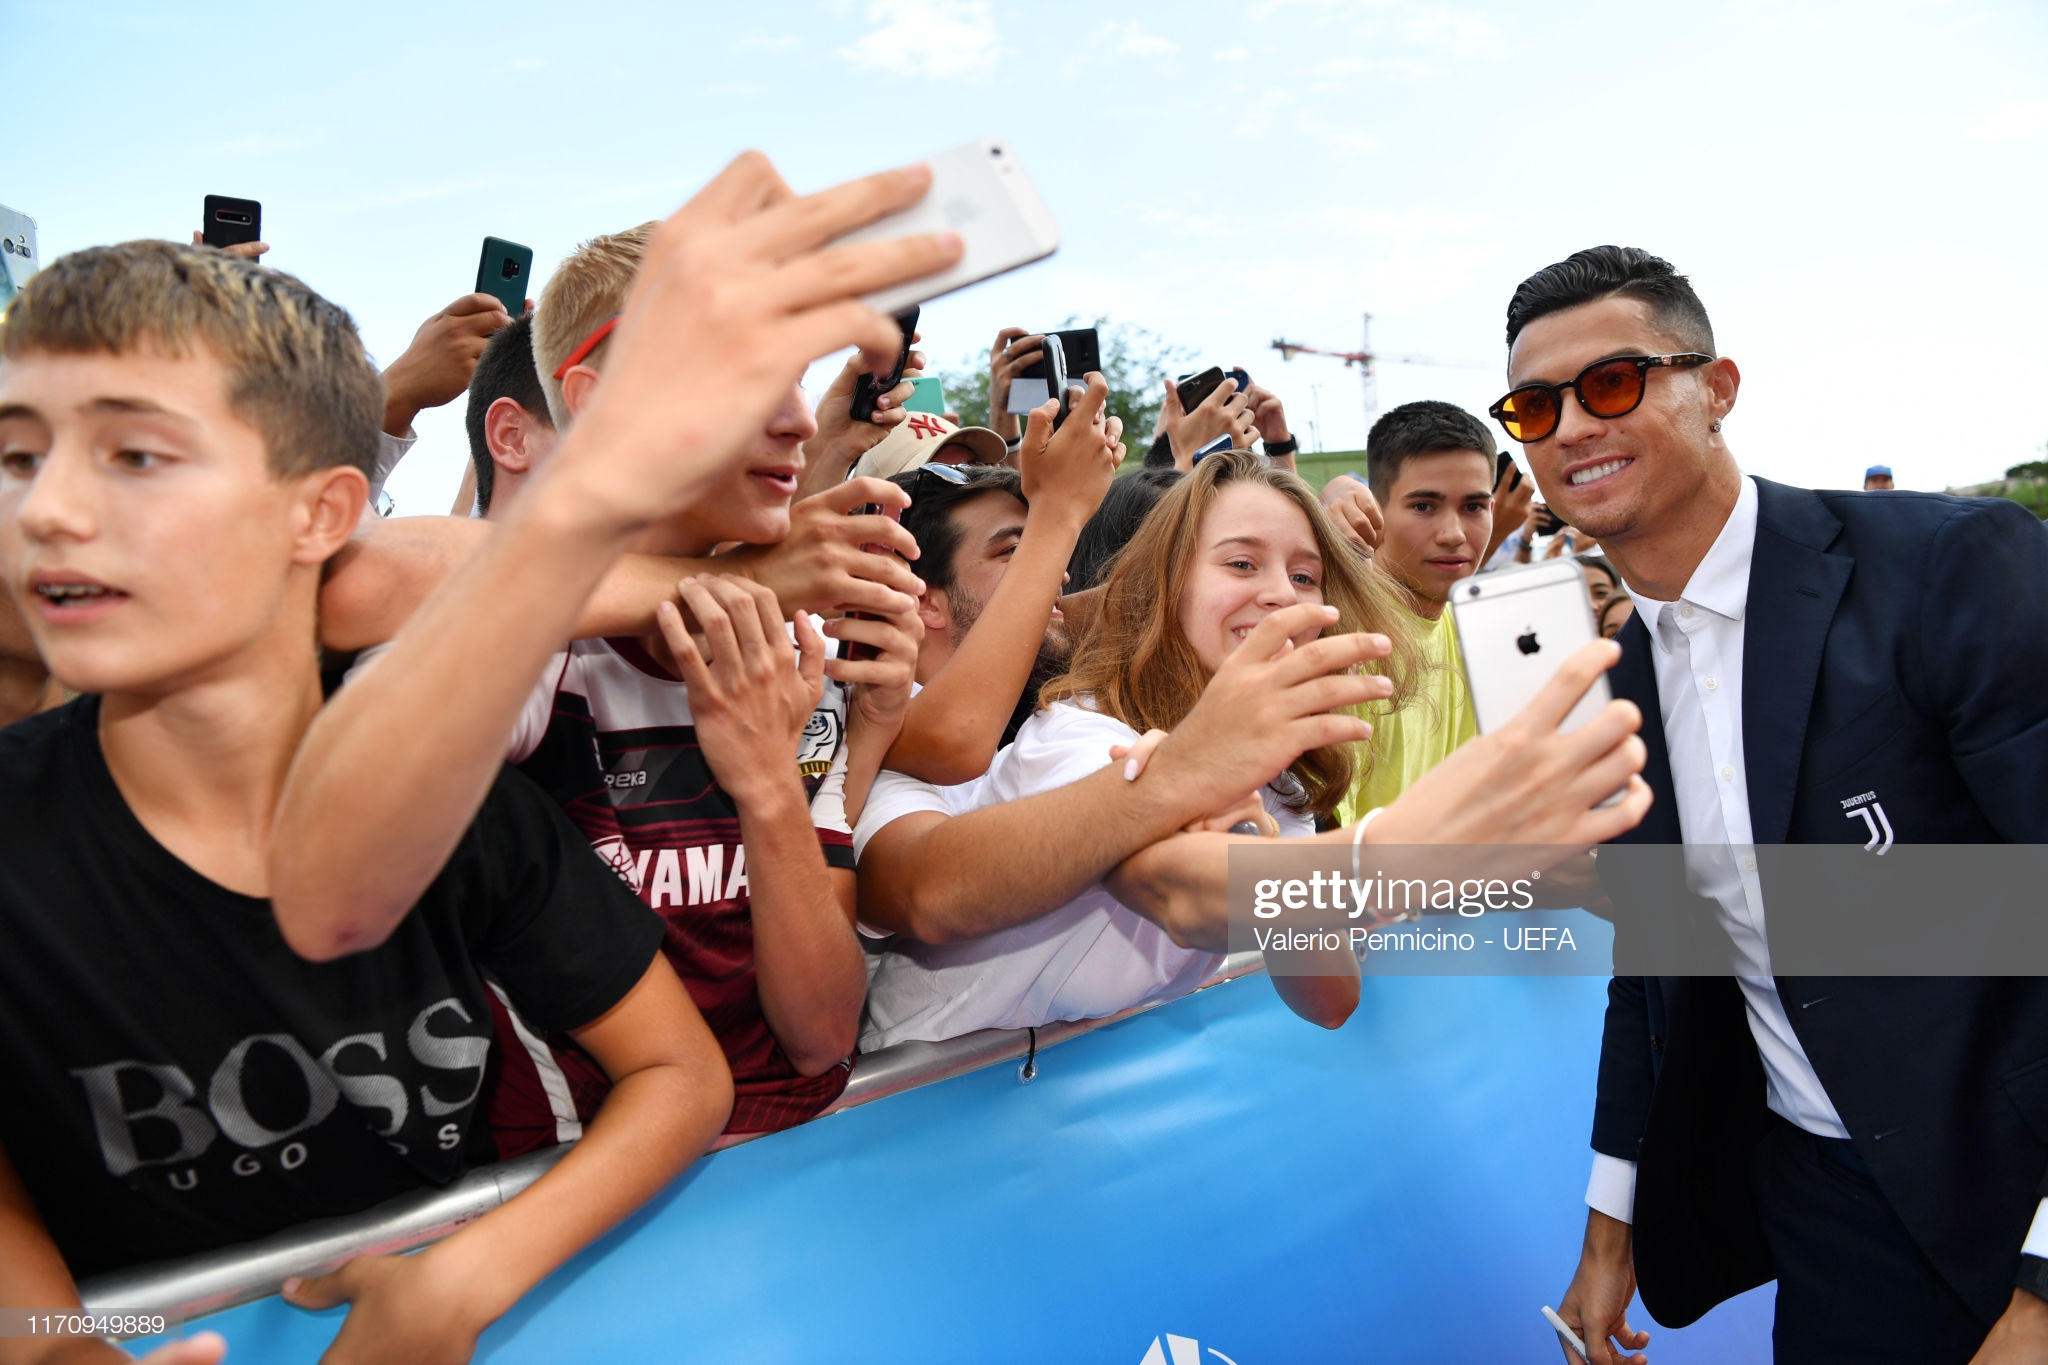 gettyimages-1170949889-2048x2048.jpg